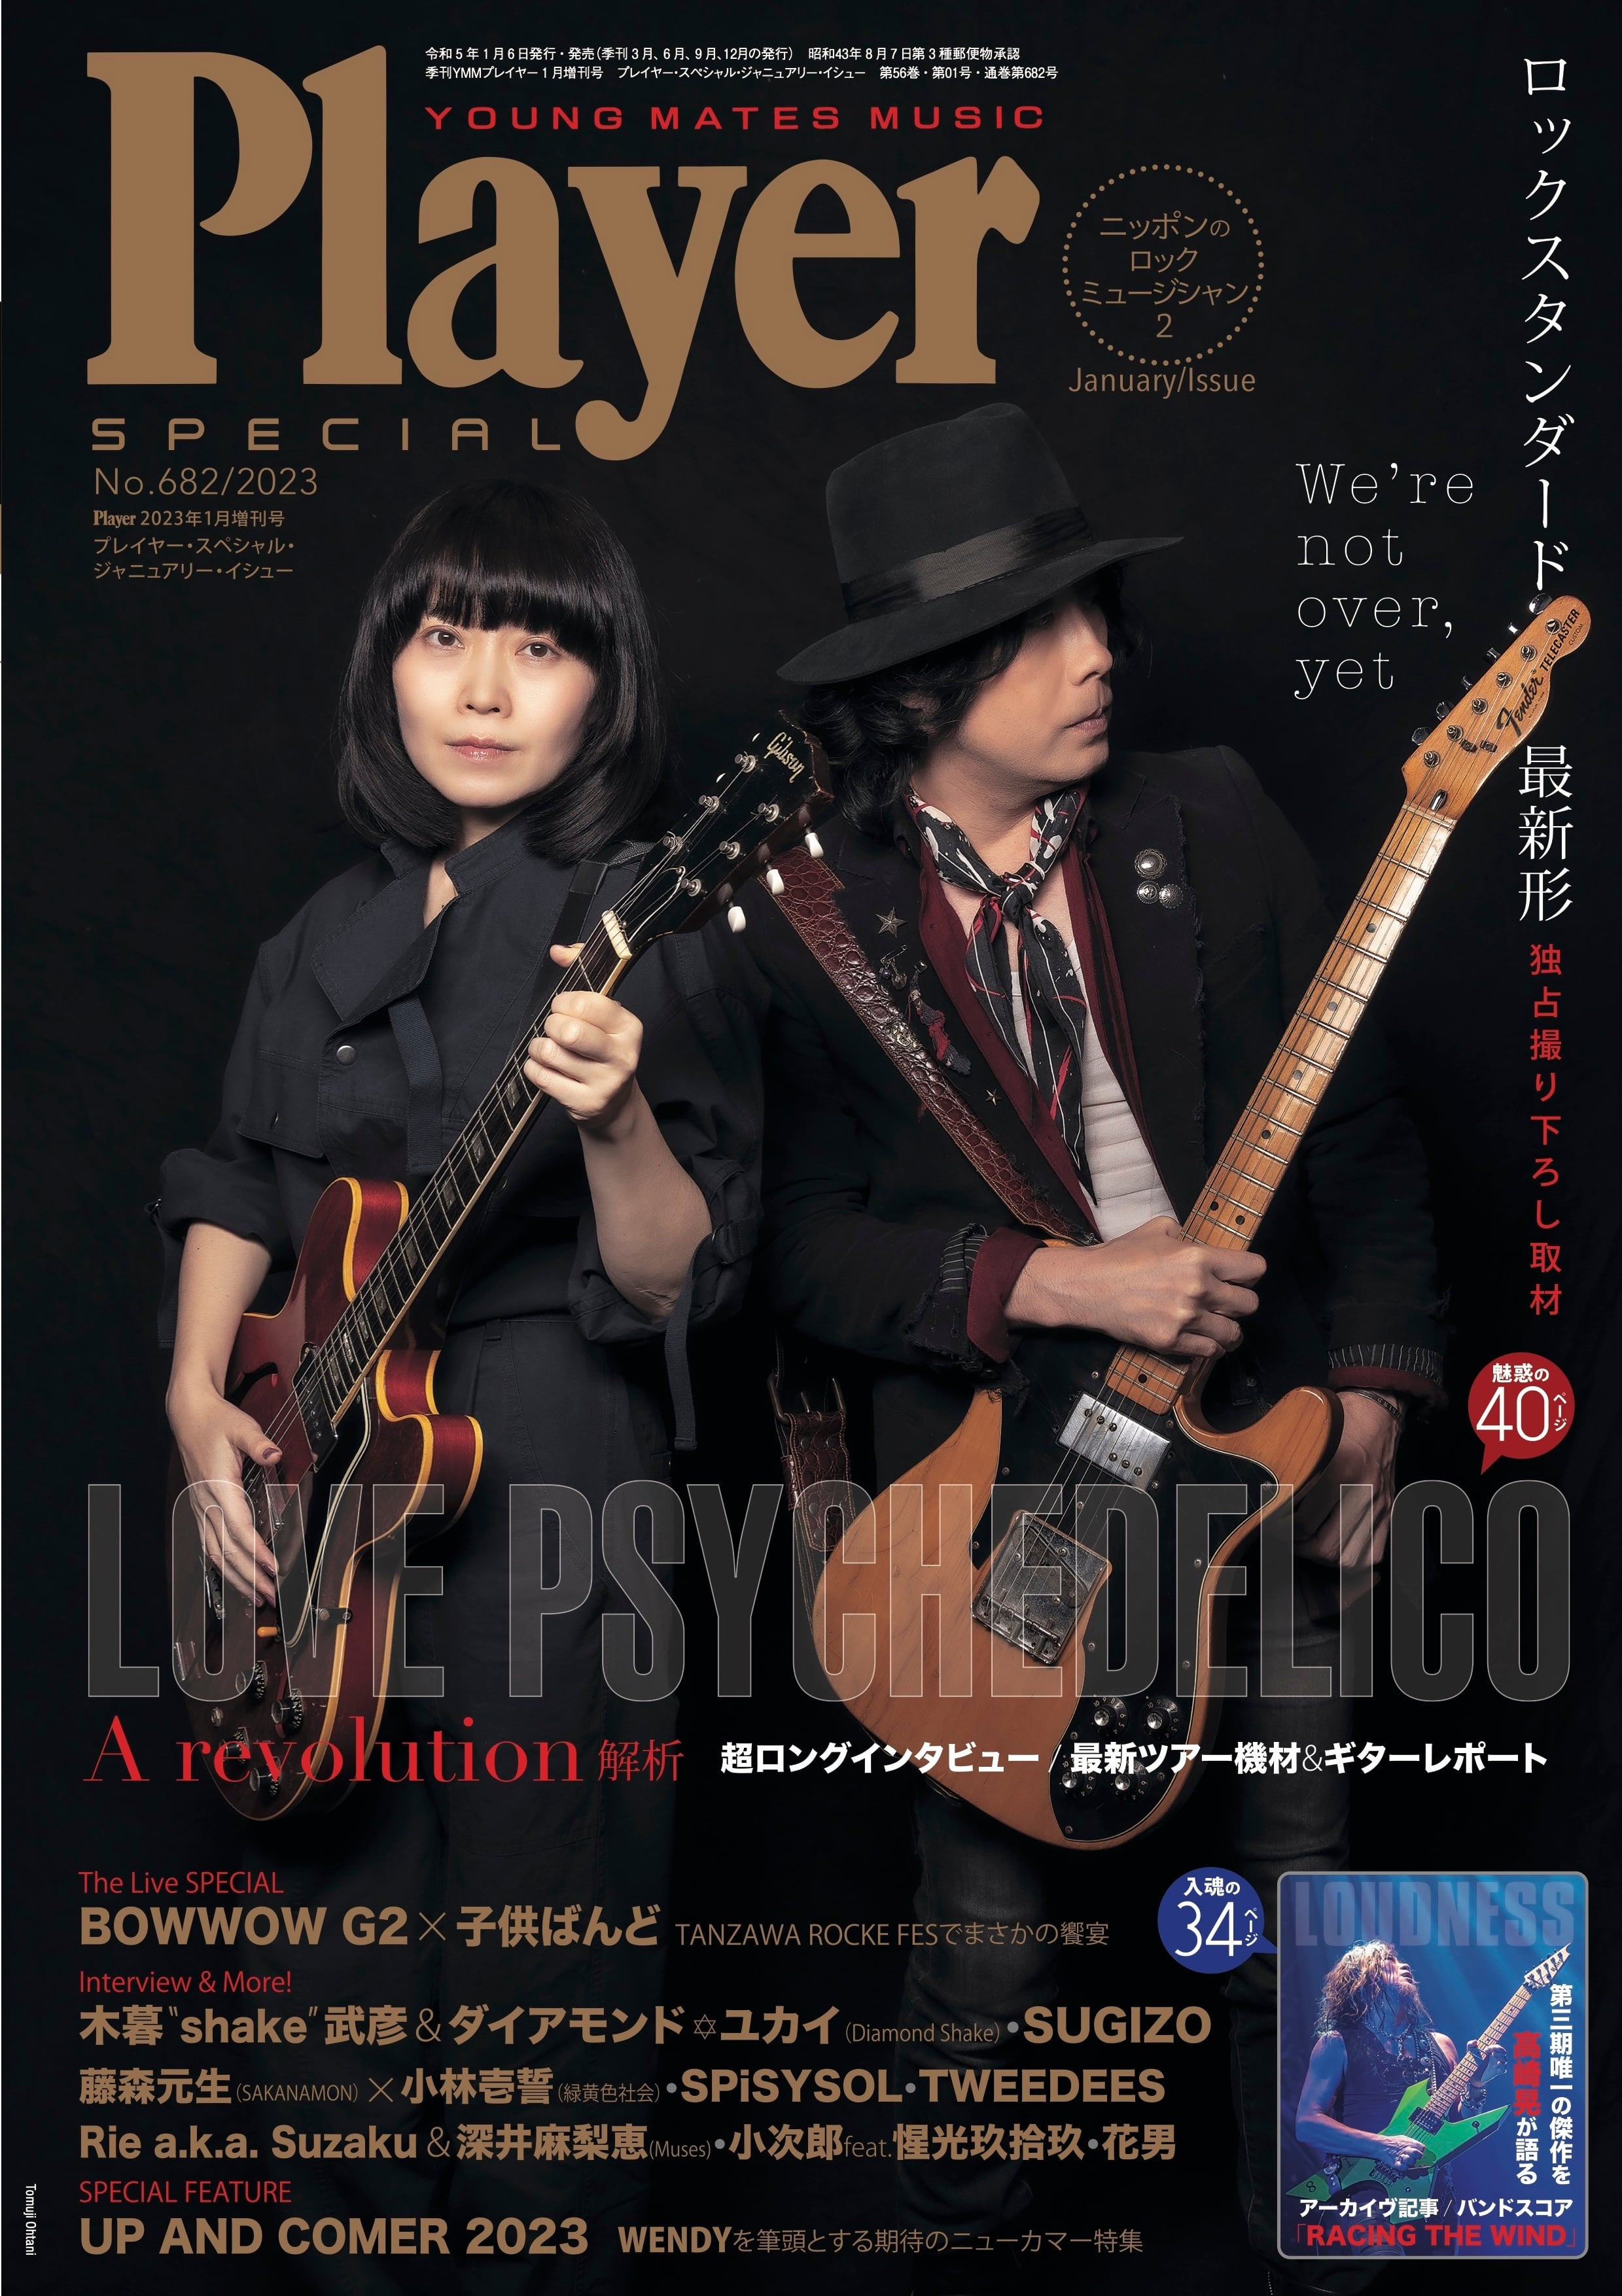 Player　SPECIAL　January　Player　Issue　-ニッポンのミュージシャン２　表紙:LOVE　PSYCHEDELICO　On-Line　Shop